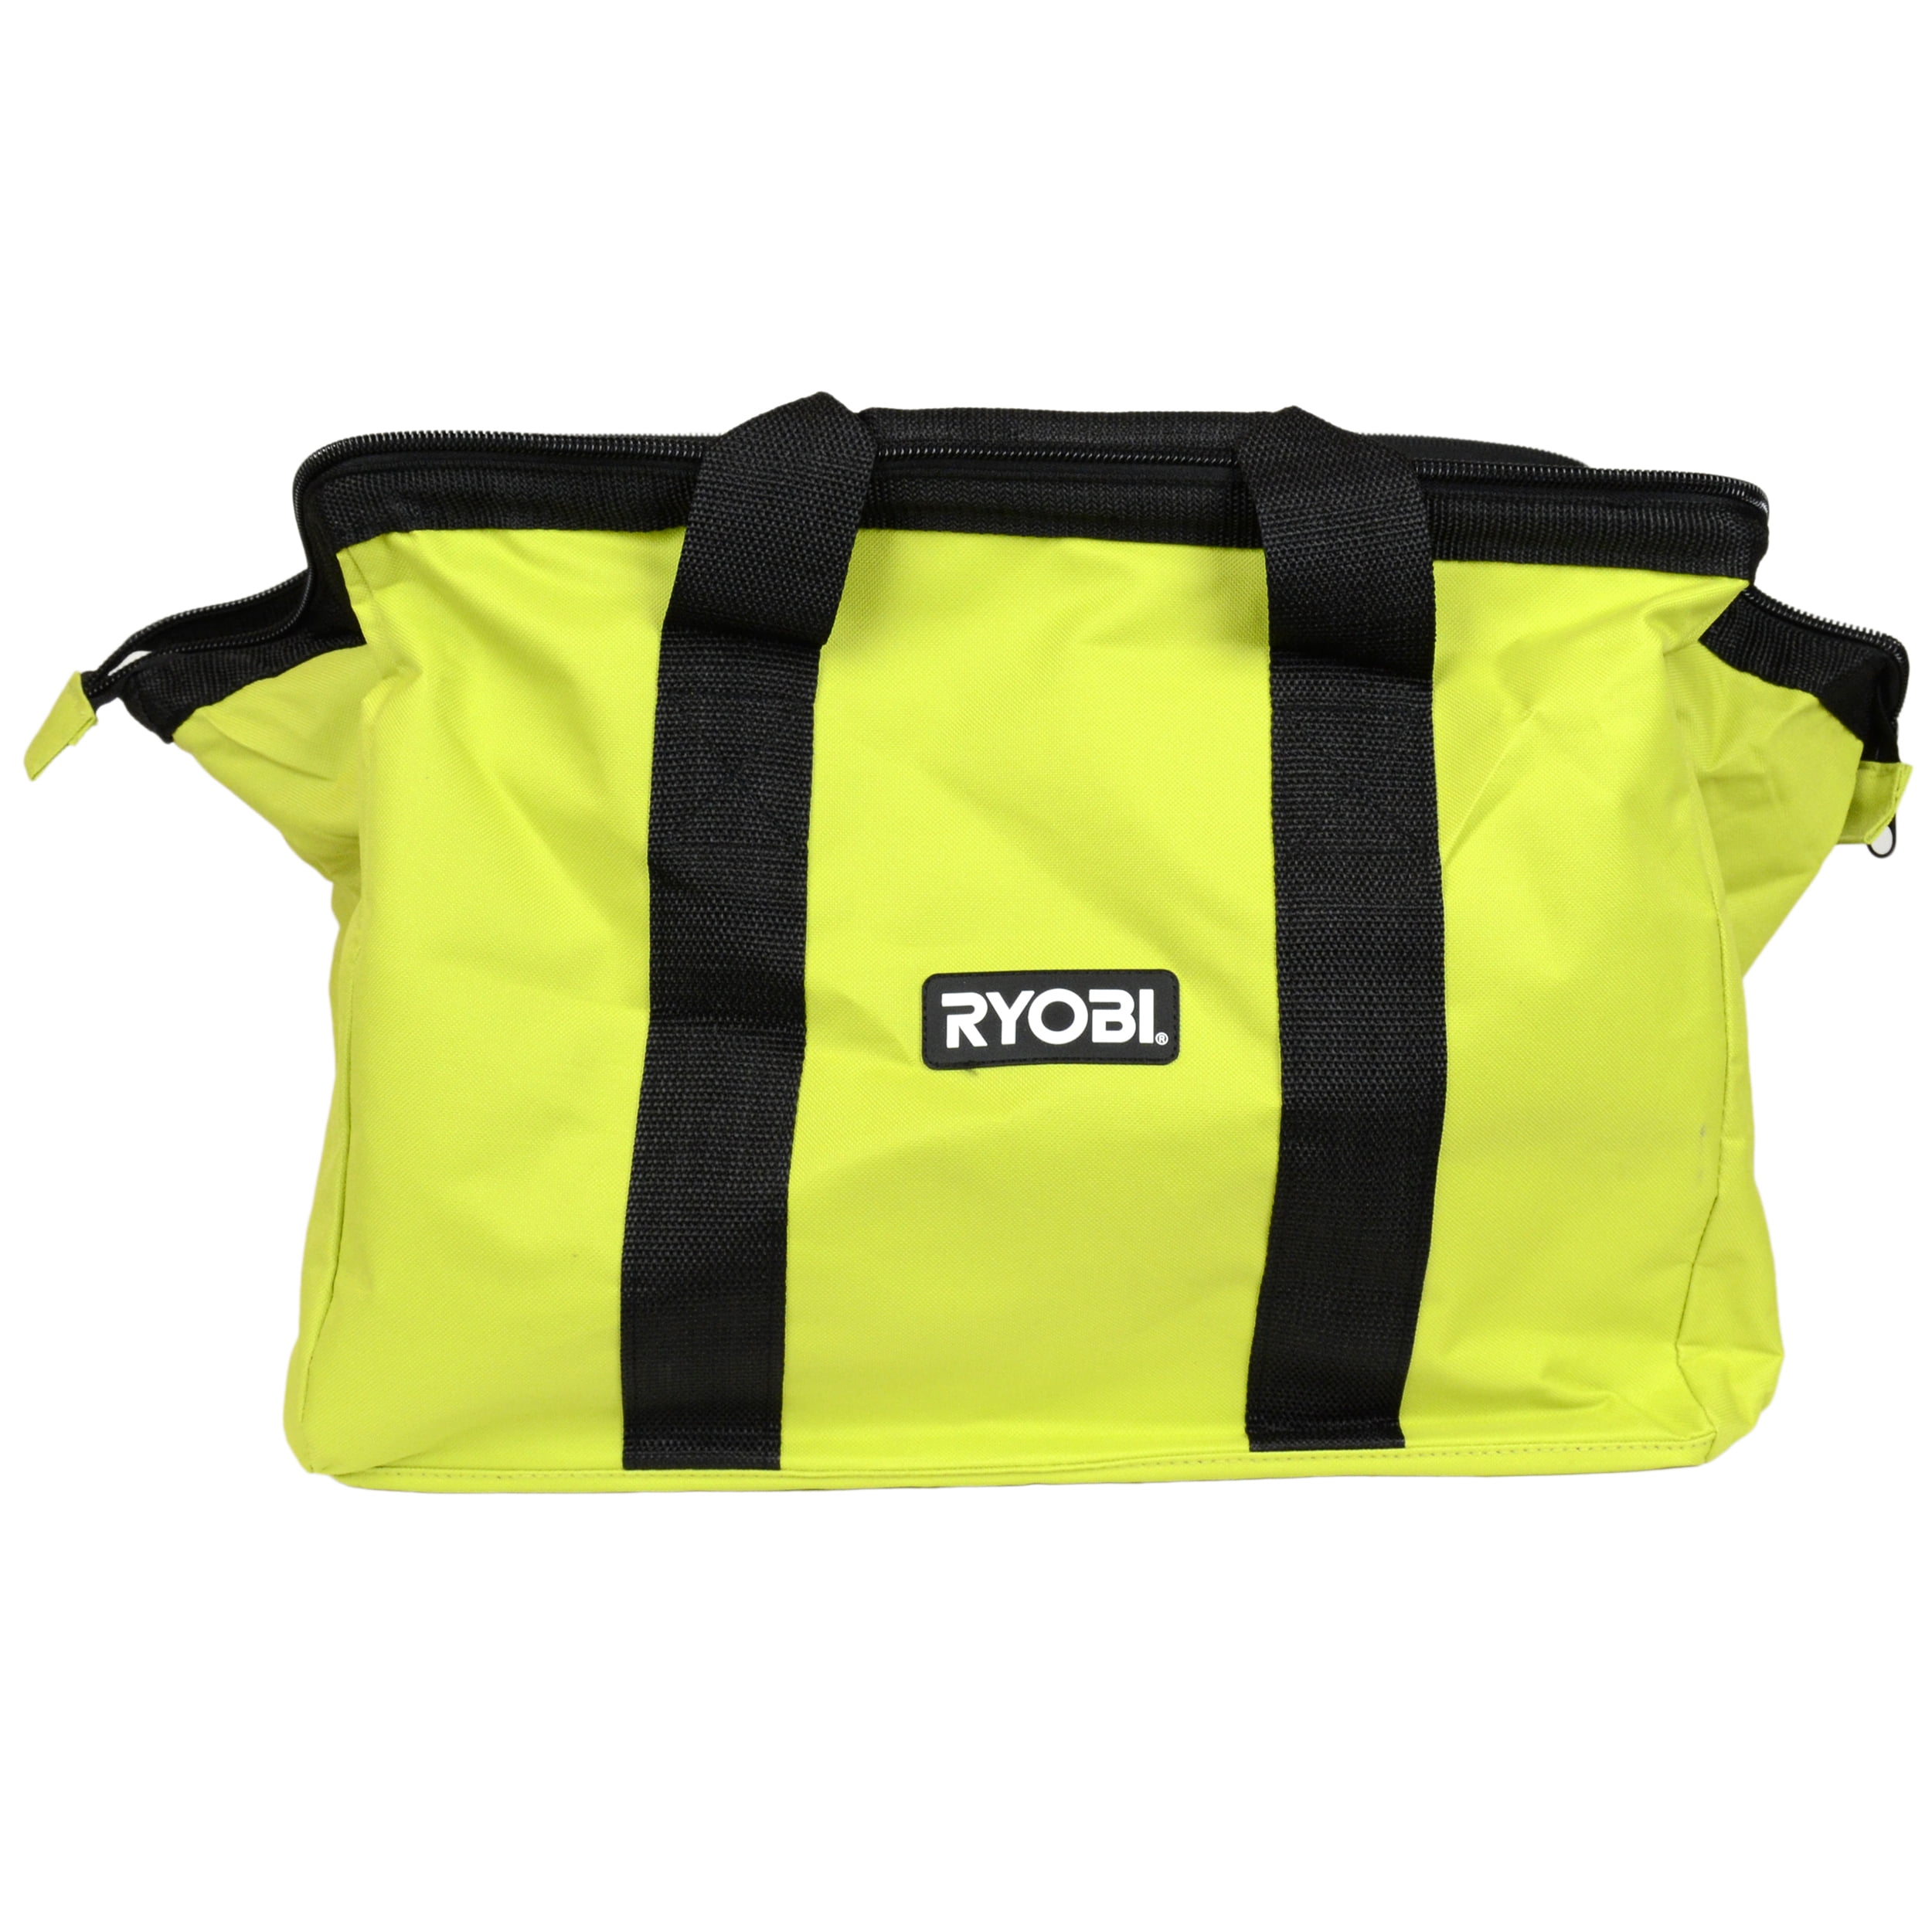 RYOBI TOOL BAGS / CASES FOR CORDED COMPACT SANDER 11"x 7"x 4" 2 BAGS ONLY! 